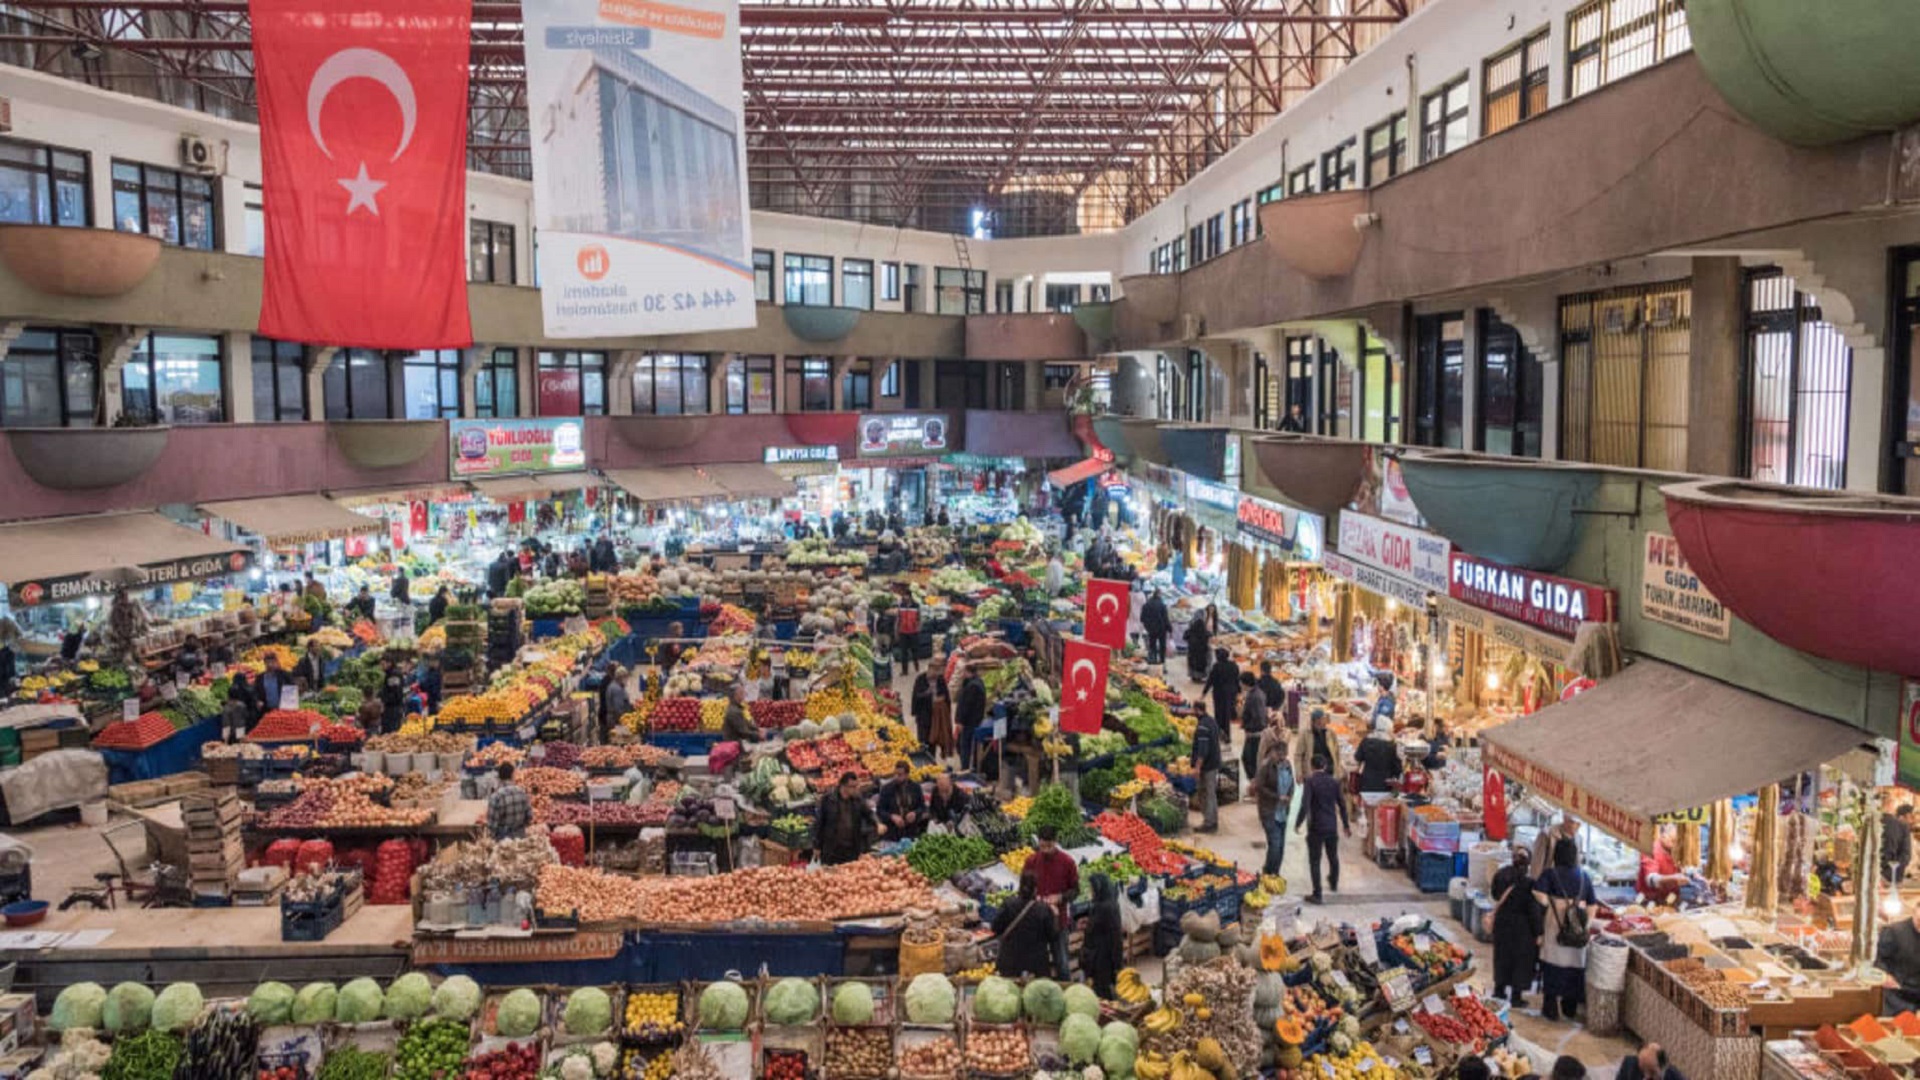 Shoppers stroll the aisles of a bazaar in Konya, Turkey. The country is experiencing brutal inflation, with food and non-alcoholic beverage prices rising 70.3% year over year for March.